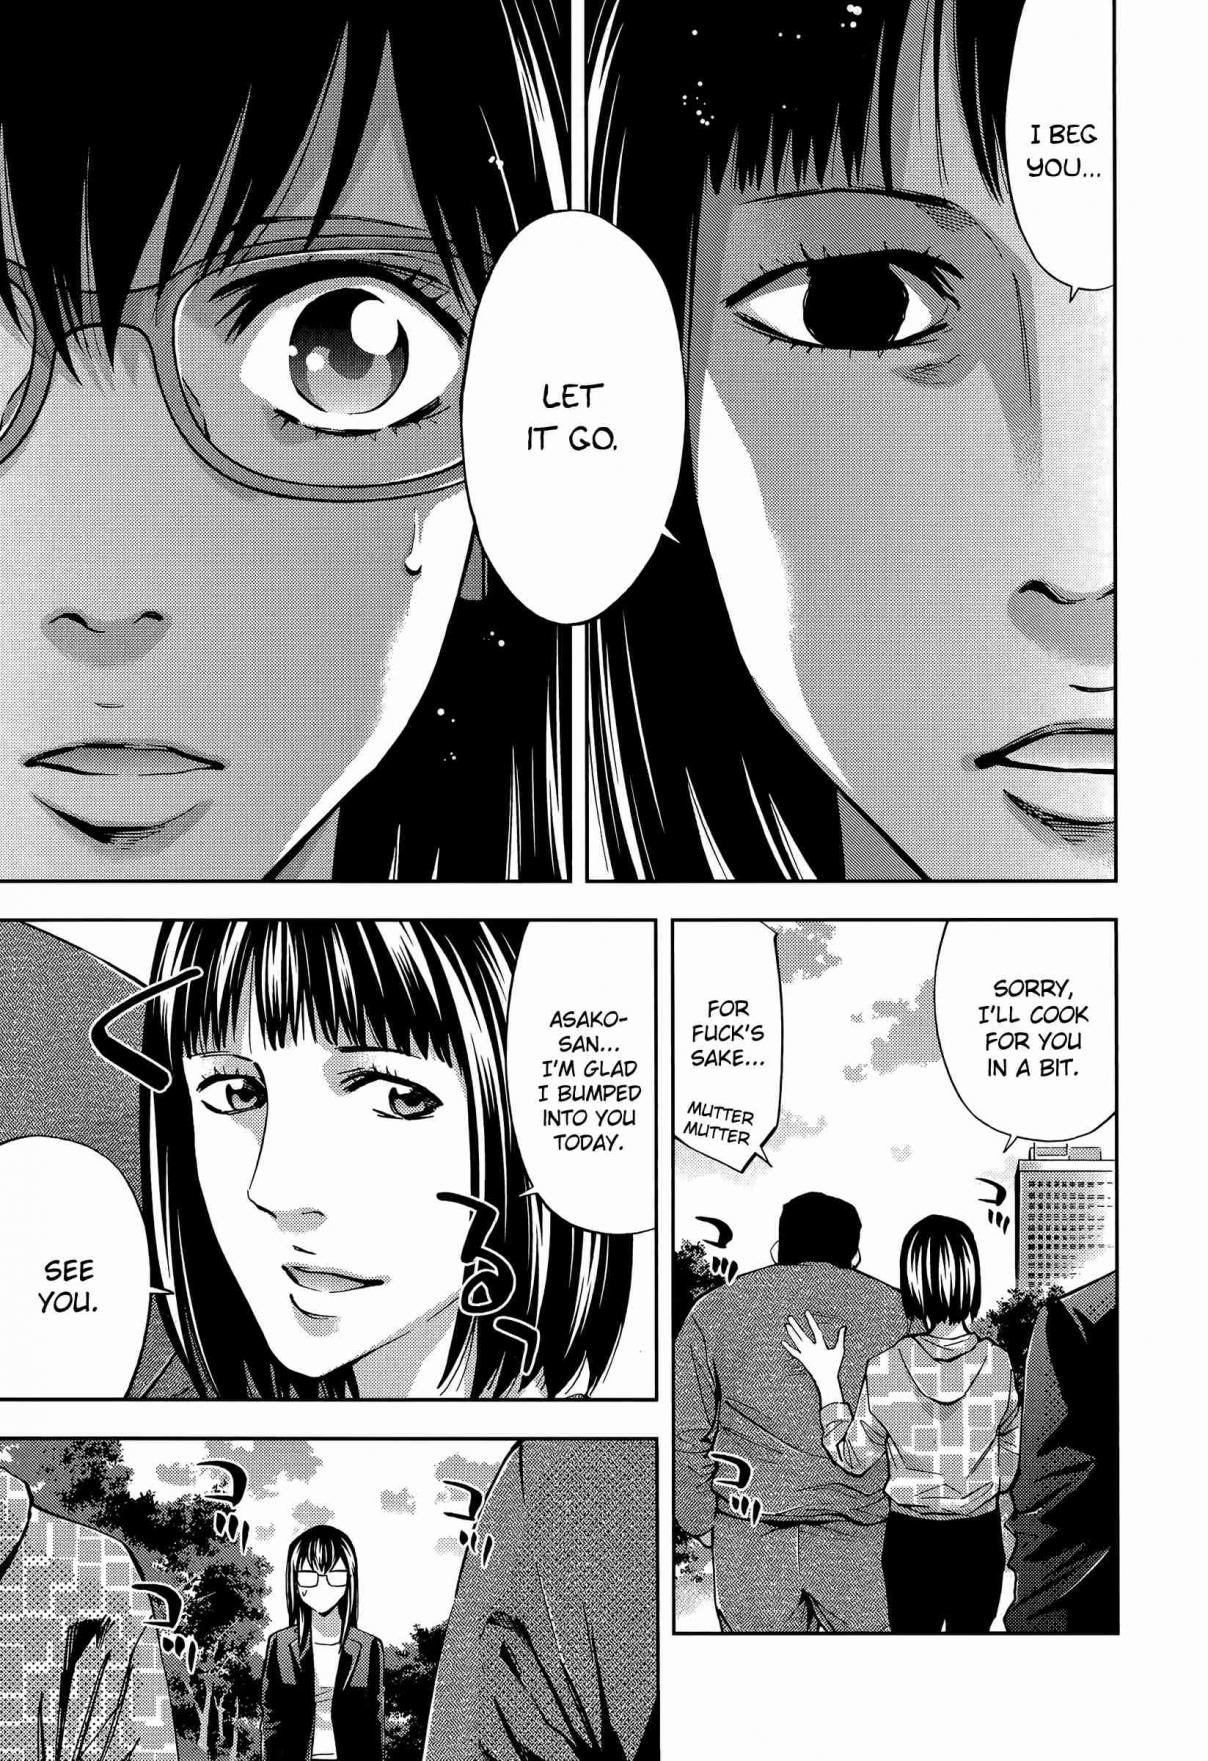 Funouhan Vol. 5 Ch. 32 Old Friend (part 1/2)